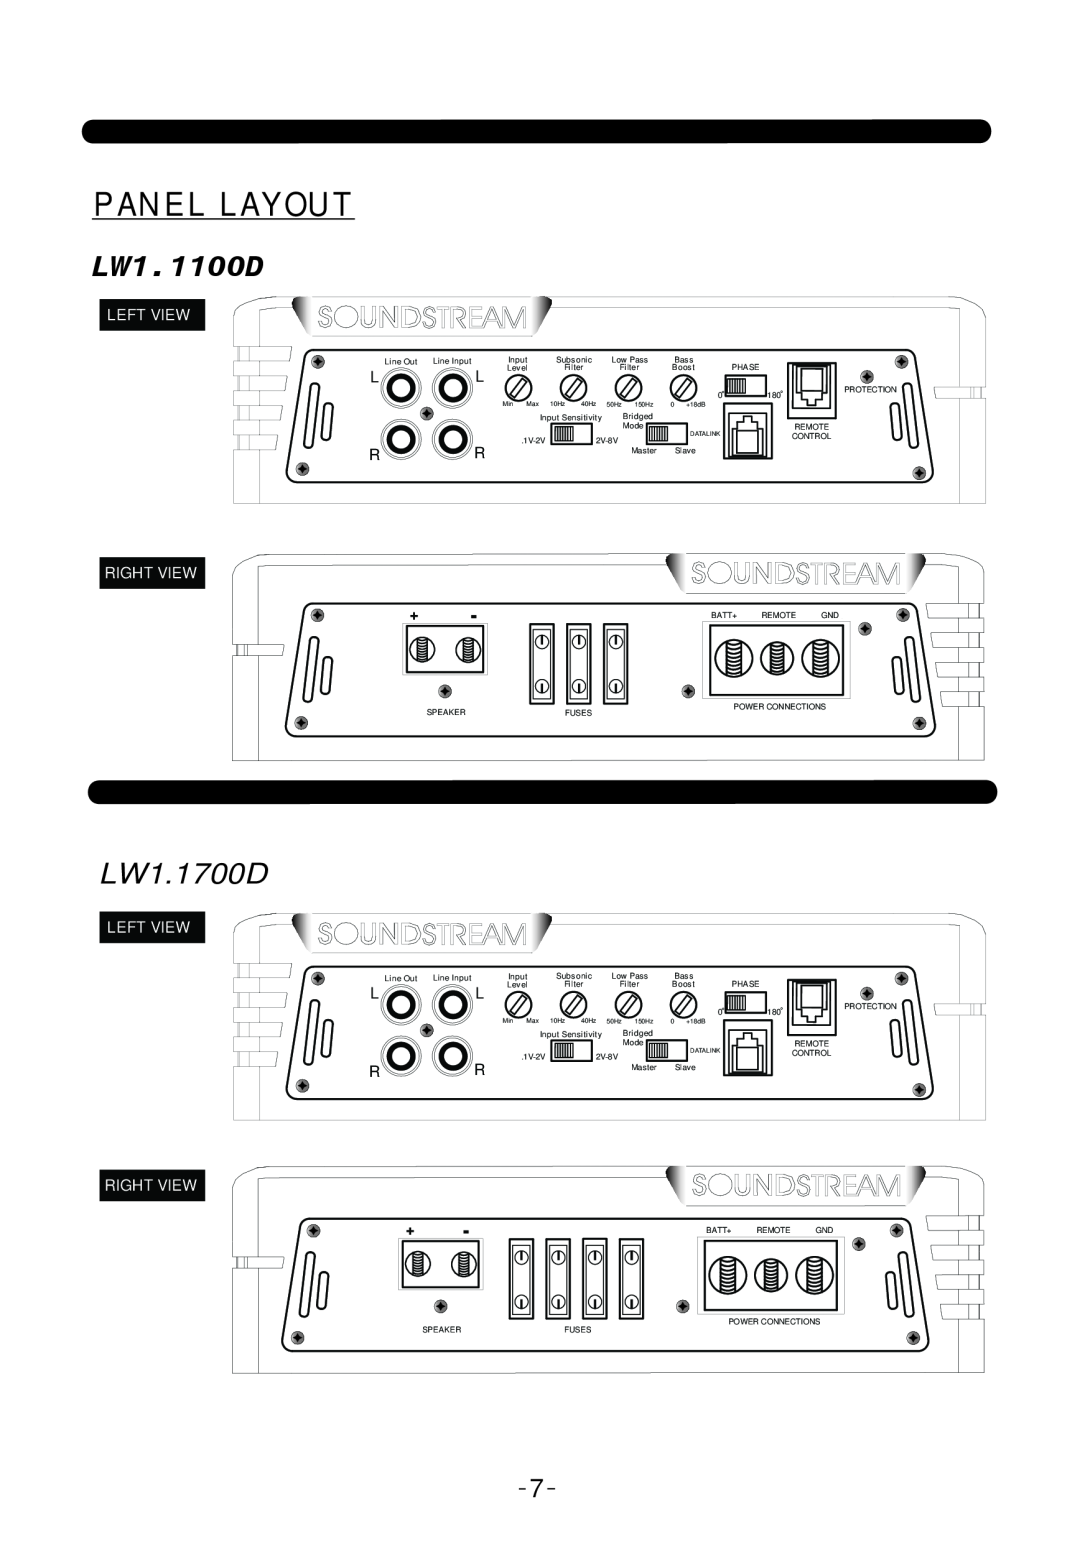 Soundstream Technologies LW1.2600D owner manual Panel Layout, LW1.1700D, LW1.1100D, Left View, Right View 